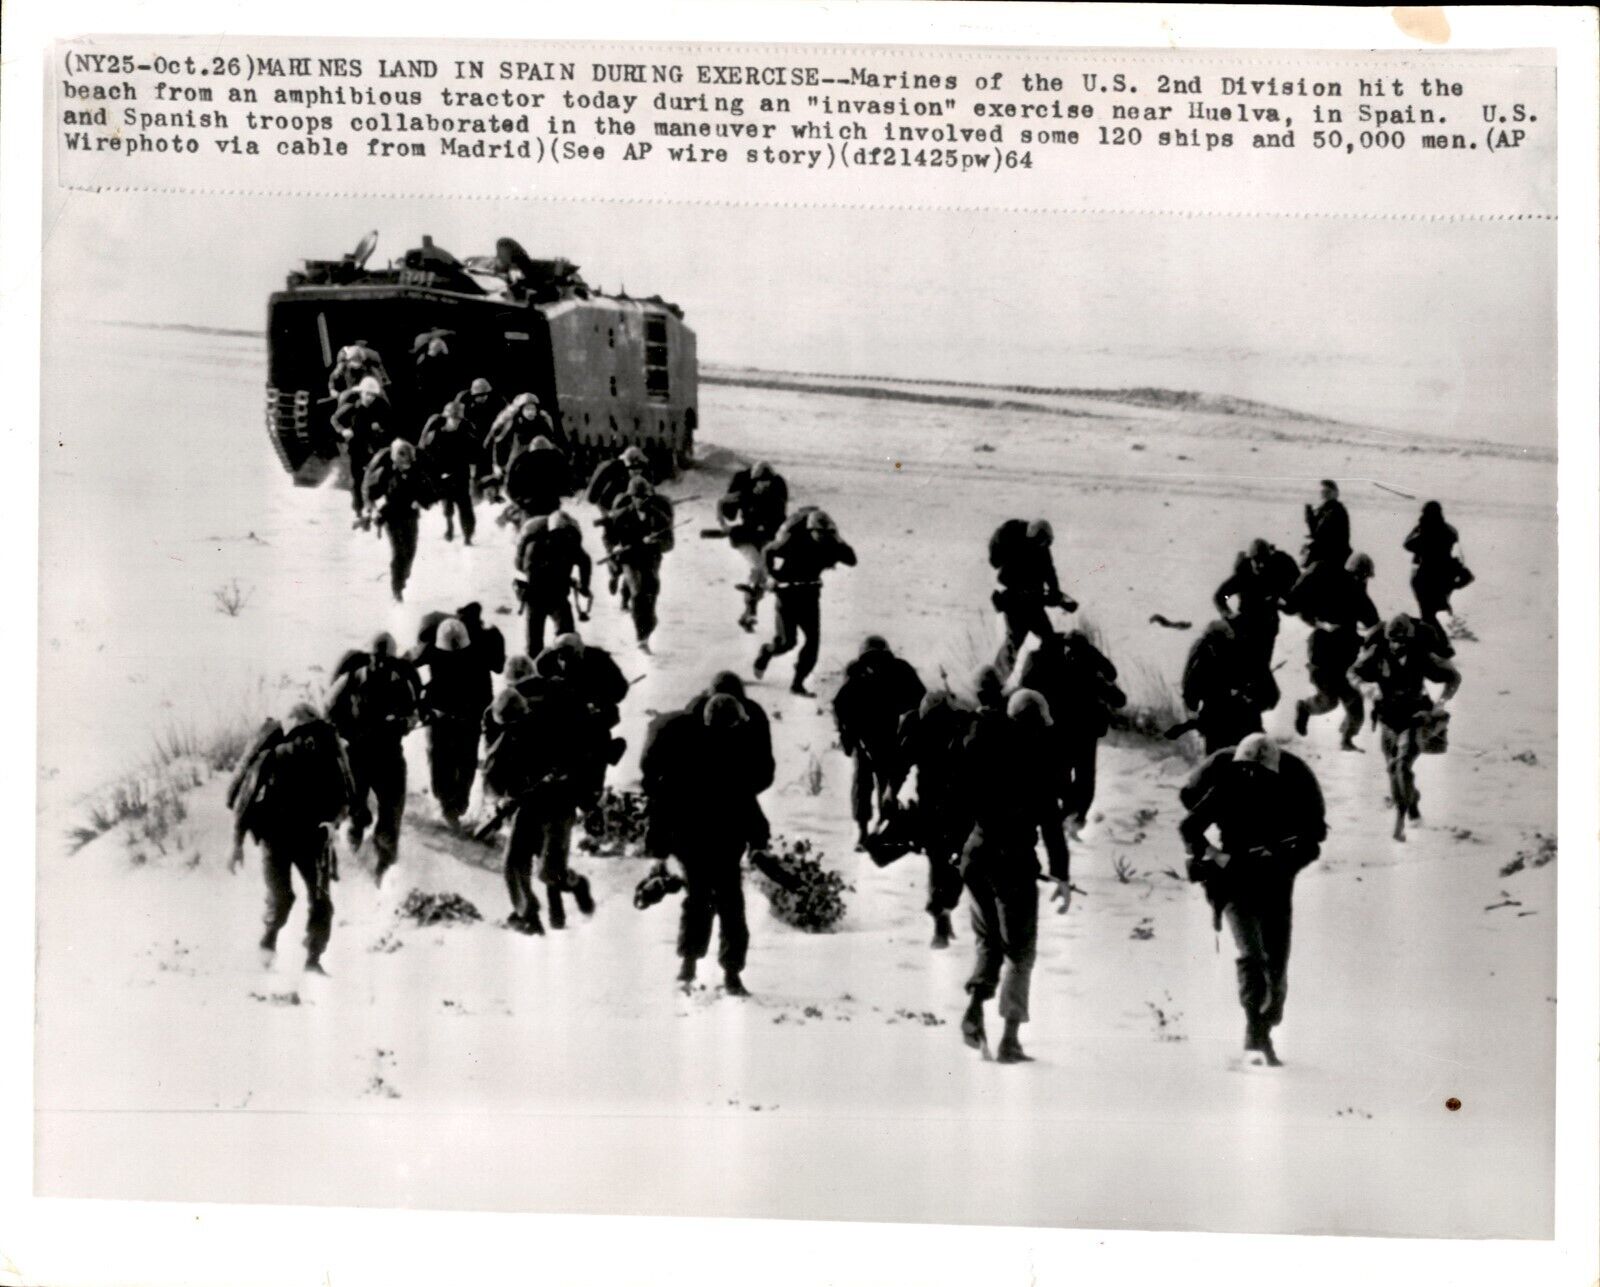 LD245 1964 AP Wire Photo US MARINES LAND IN SPAIN DURING EXERCISE STORMING BEACH